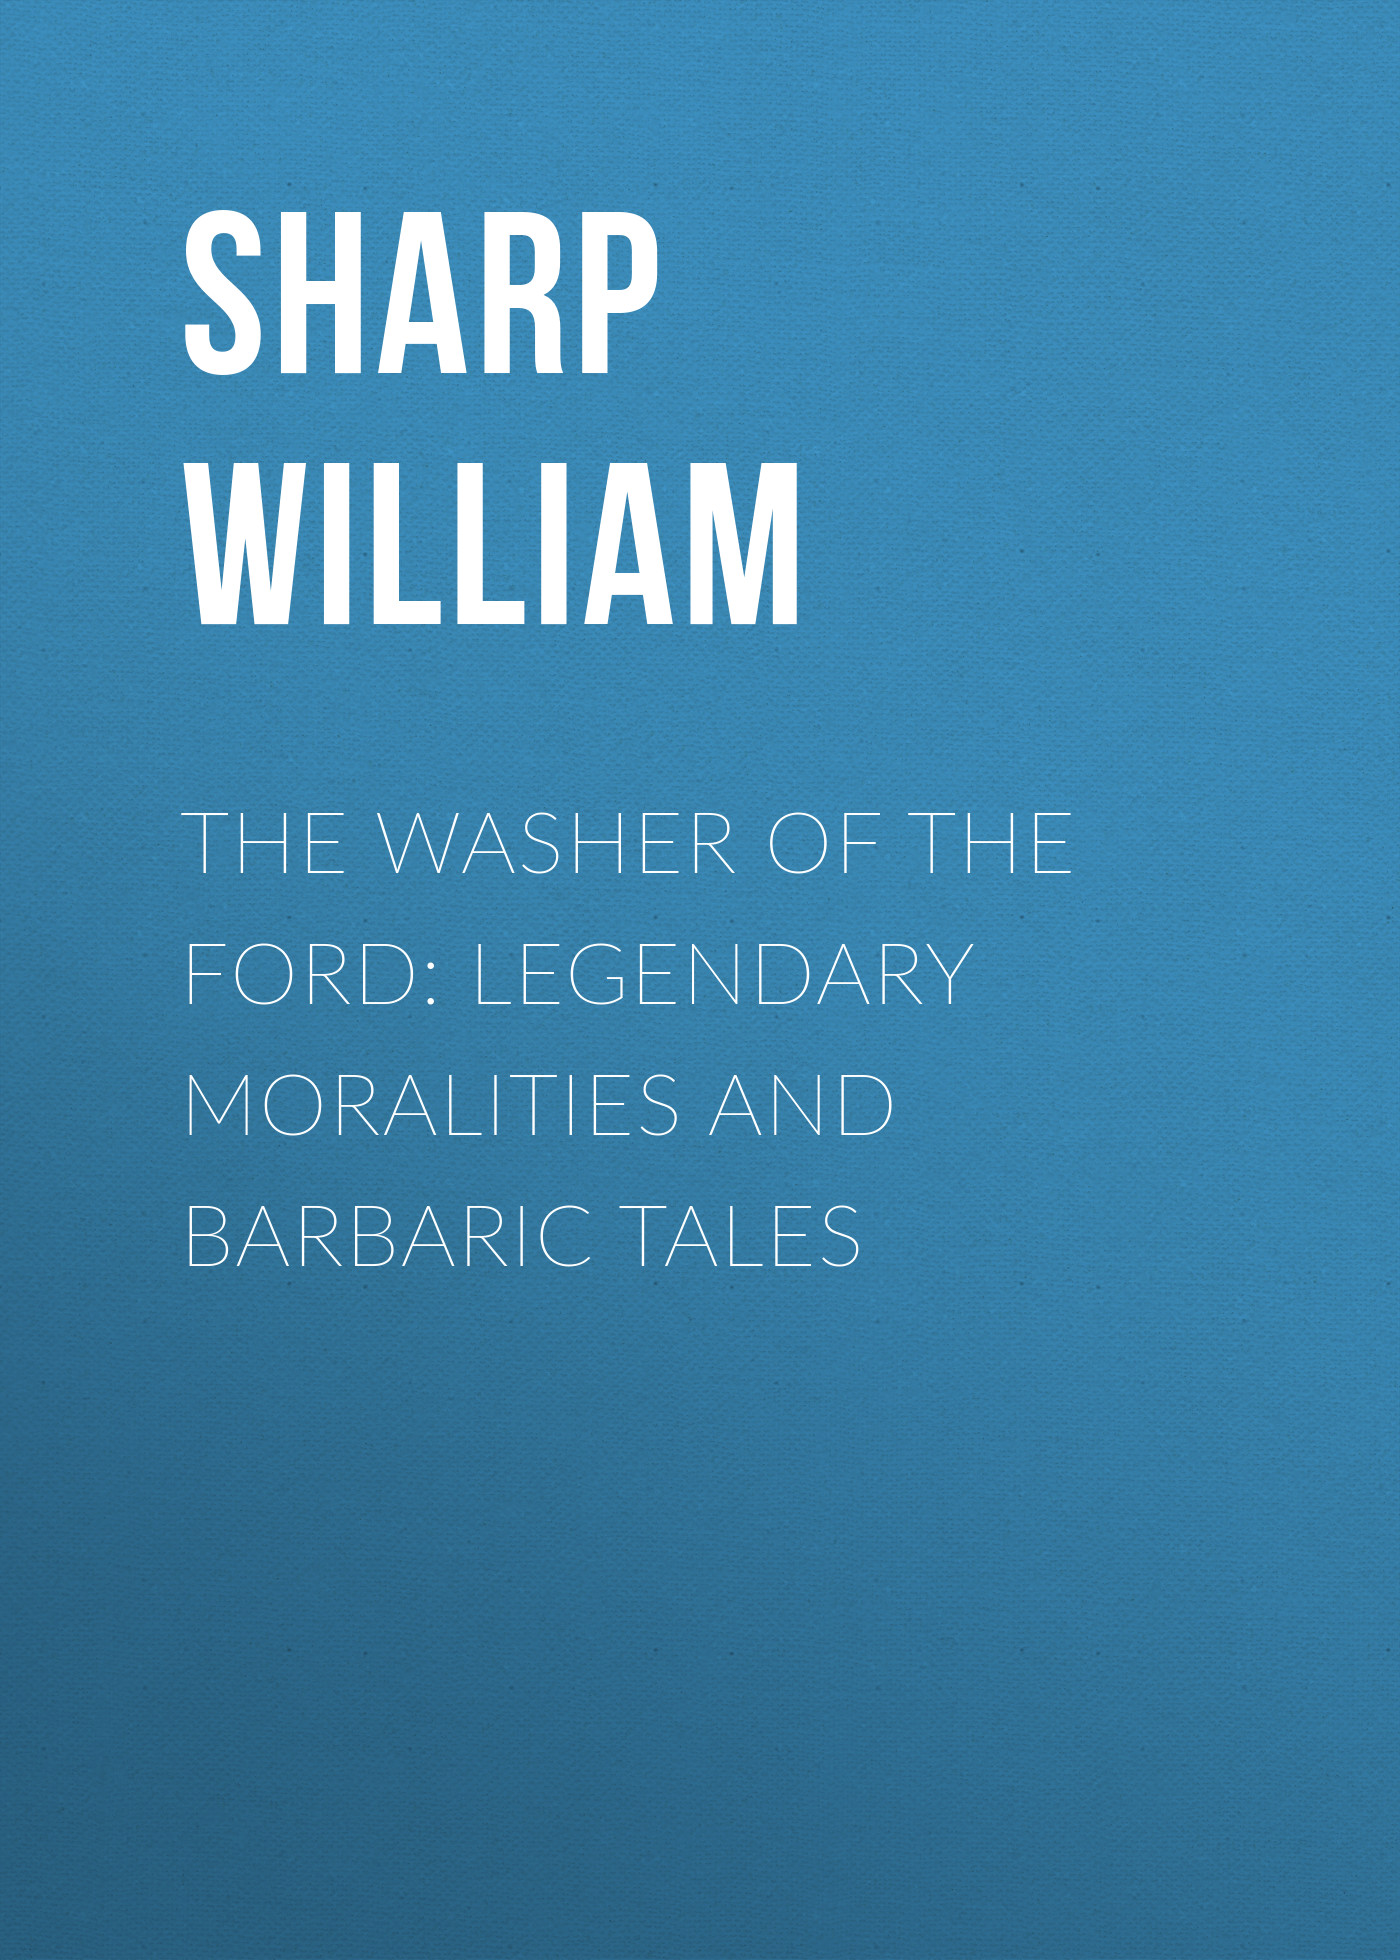 The Washer of the Ford: Legendary moralities and barbaric tales